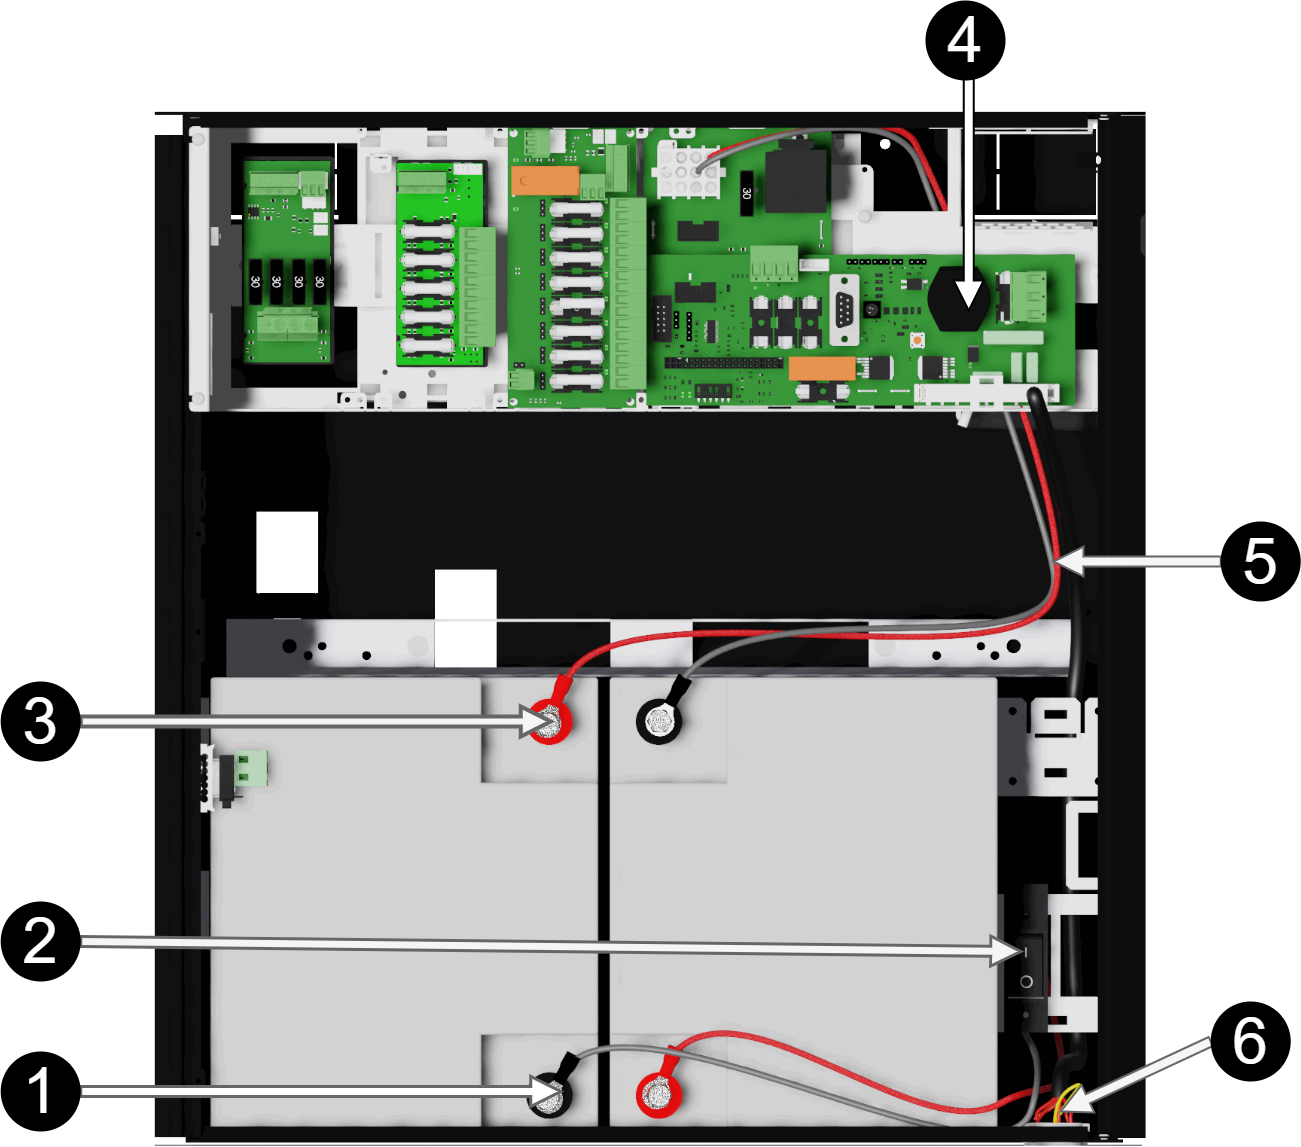 Connection of batteries in FLX M. Motherboards may differ depending on the configuration, but connection of batteries takes place in the same way.